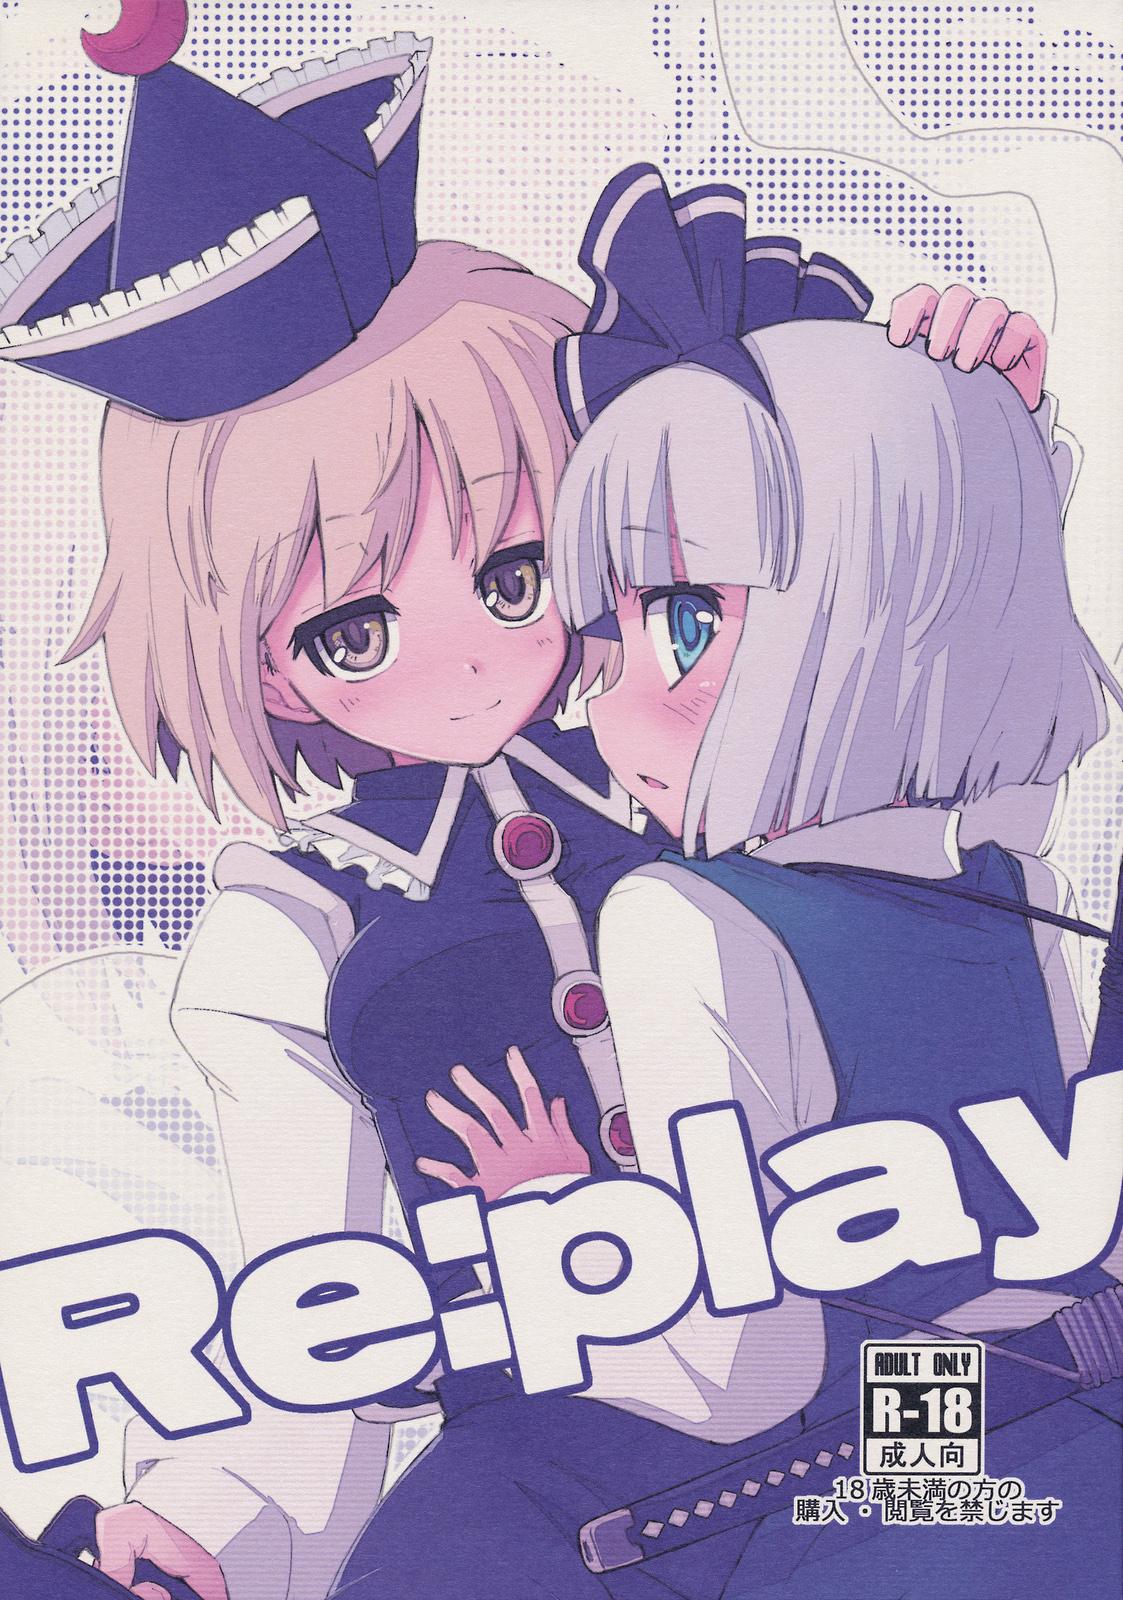 Re:play 0